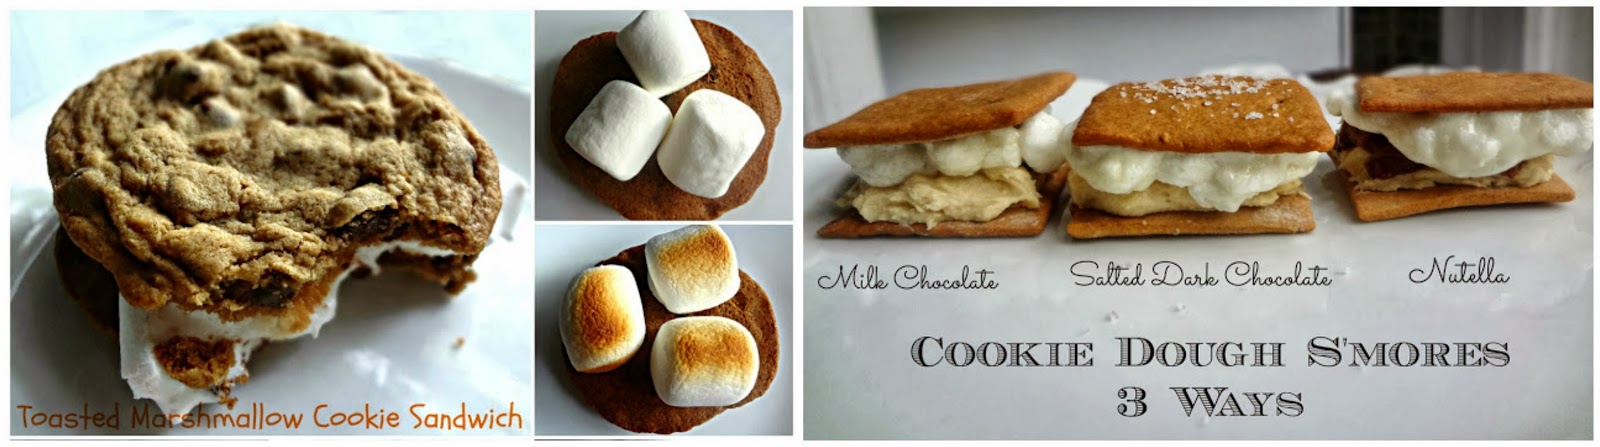 Toasted Marshmallow Cookie Sandwich and Cookie Dough S'mores-3 Ways